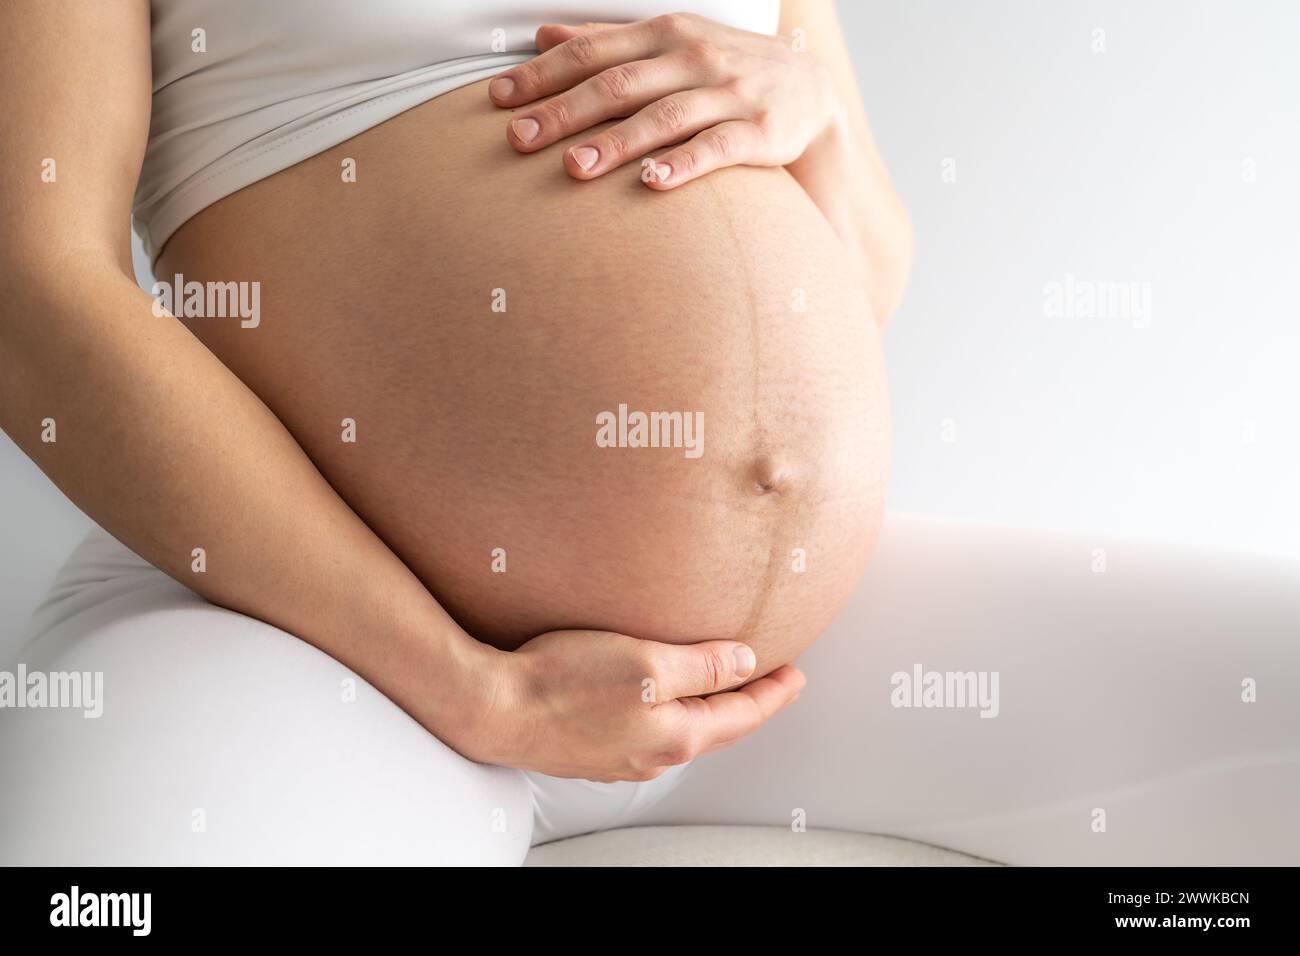 Description: Midsection of a woman sitting on a stool and gently holding her very round pregnant baby belly. Side angle view. White background. Bright Stock Photo